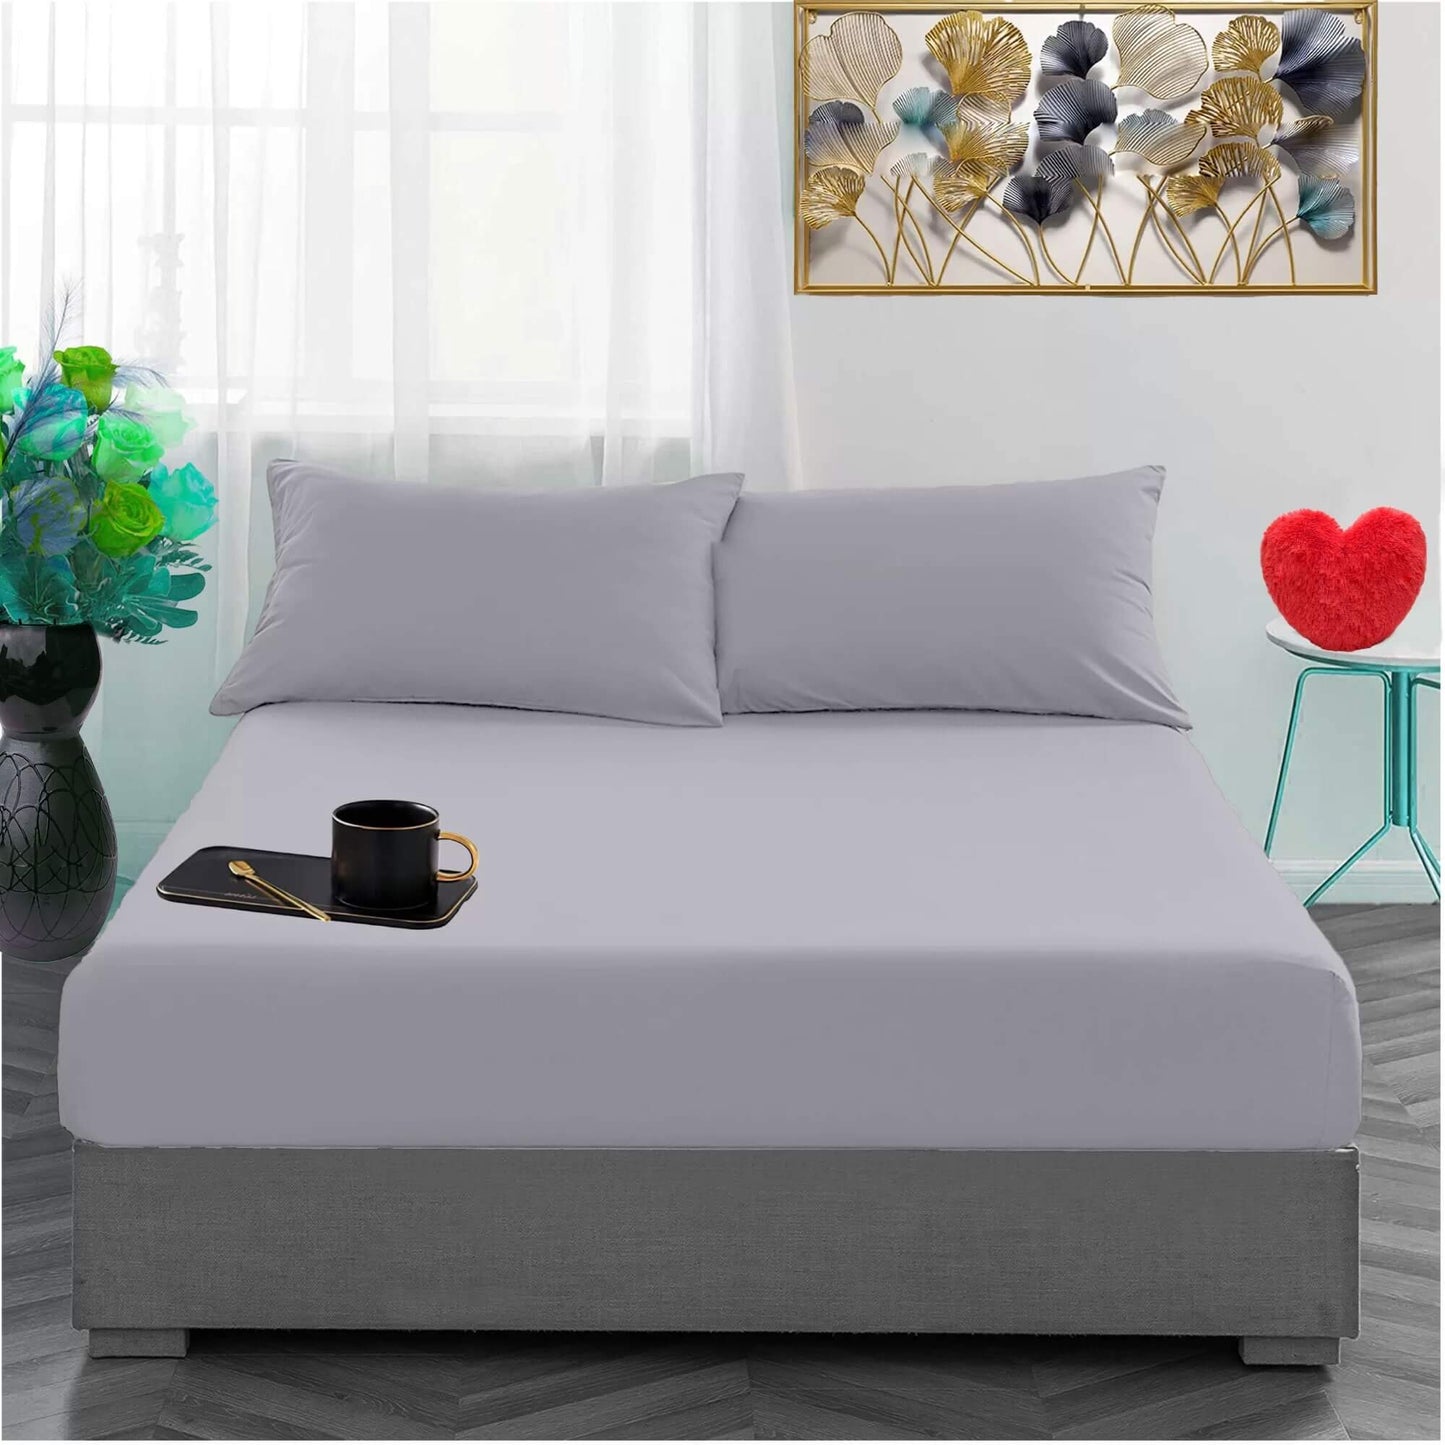 Small Double Fitted Sheet 100% Brushed Cotton Bed Sheet - TheComfortshop.co.ukBed Sheets0721718977322thecomfortshopTheComfortshop.co.ukFlannelette FIT Grey 4FT-1Grey4FT Small DoubleSmall Double Fitted Sheet 100% Brushed Cotton Bed Sheet - TheComfortshop.co.uk